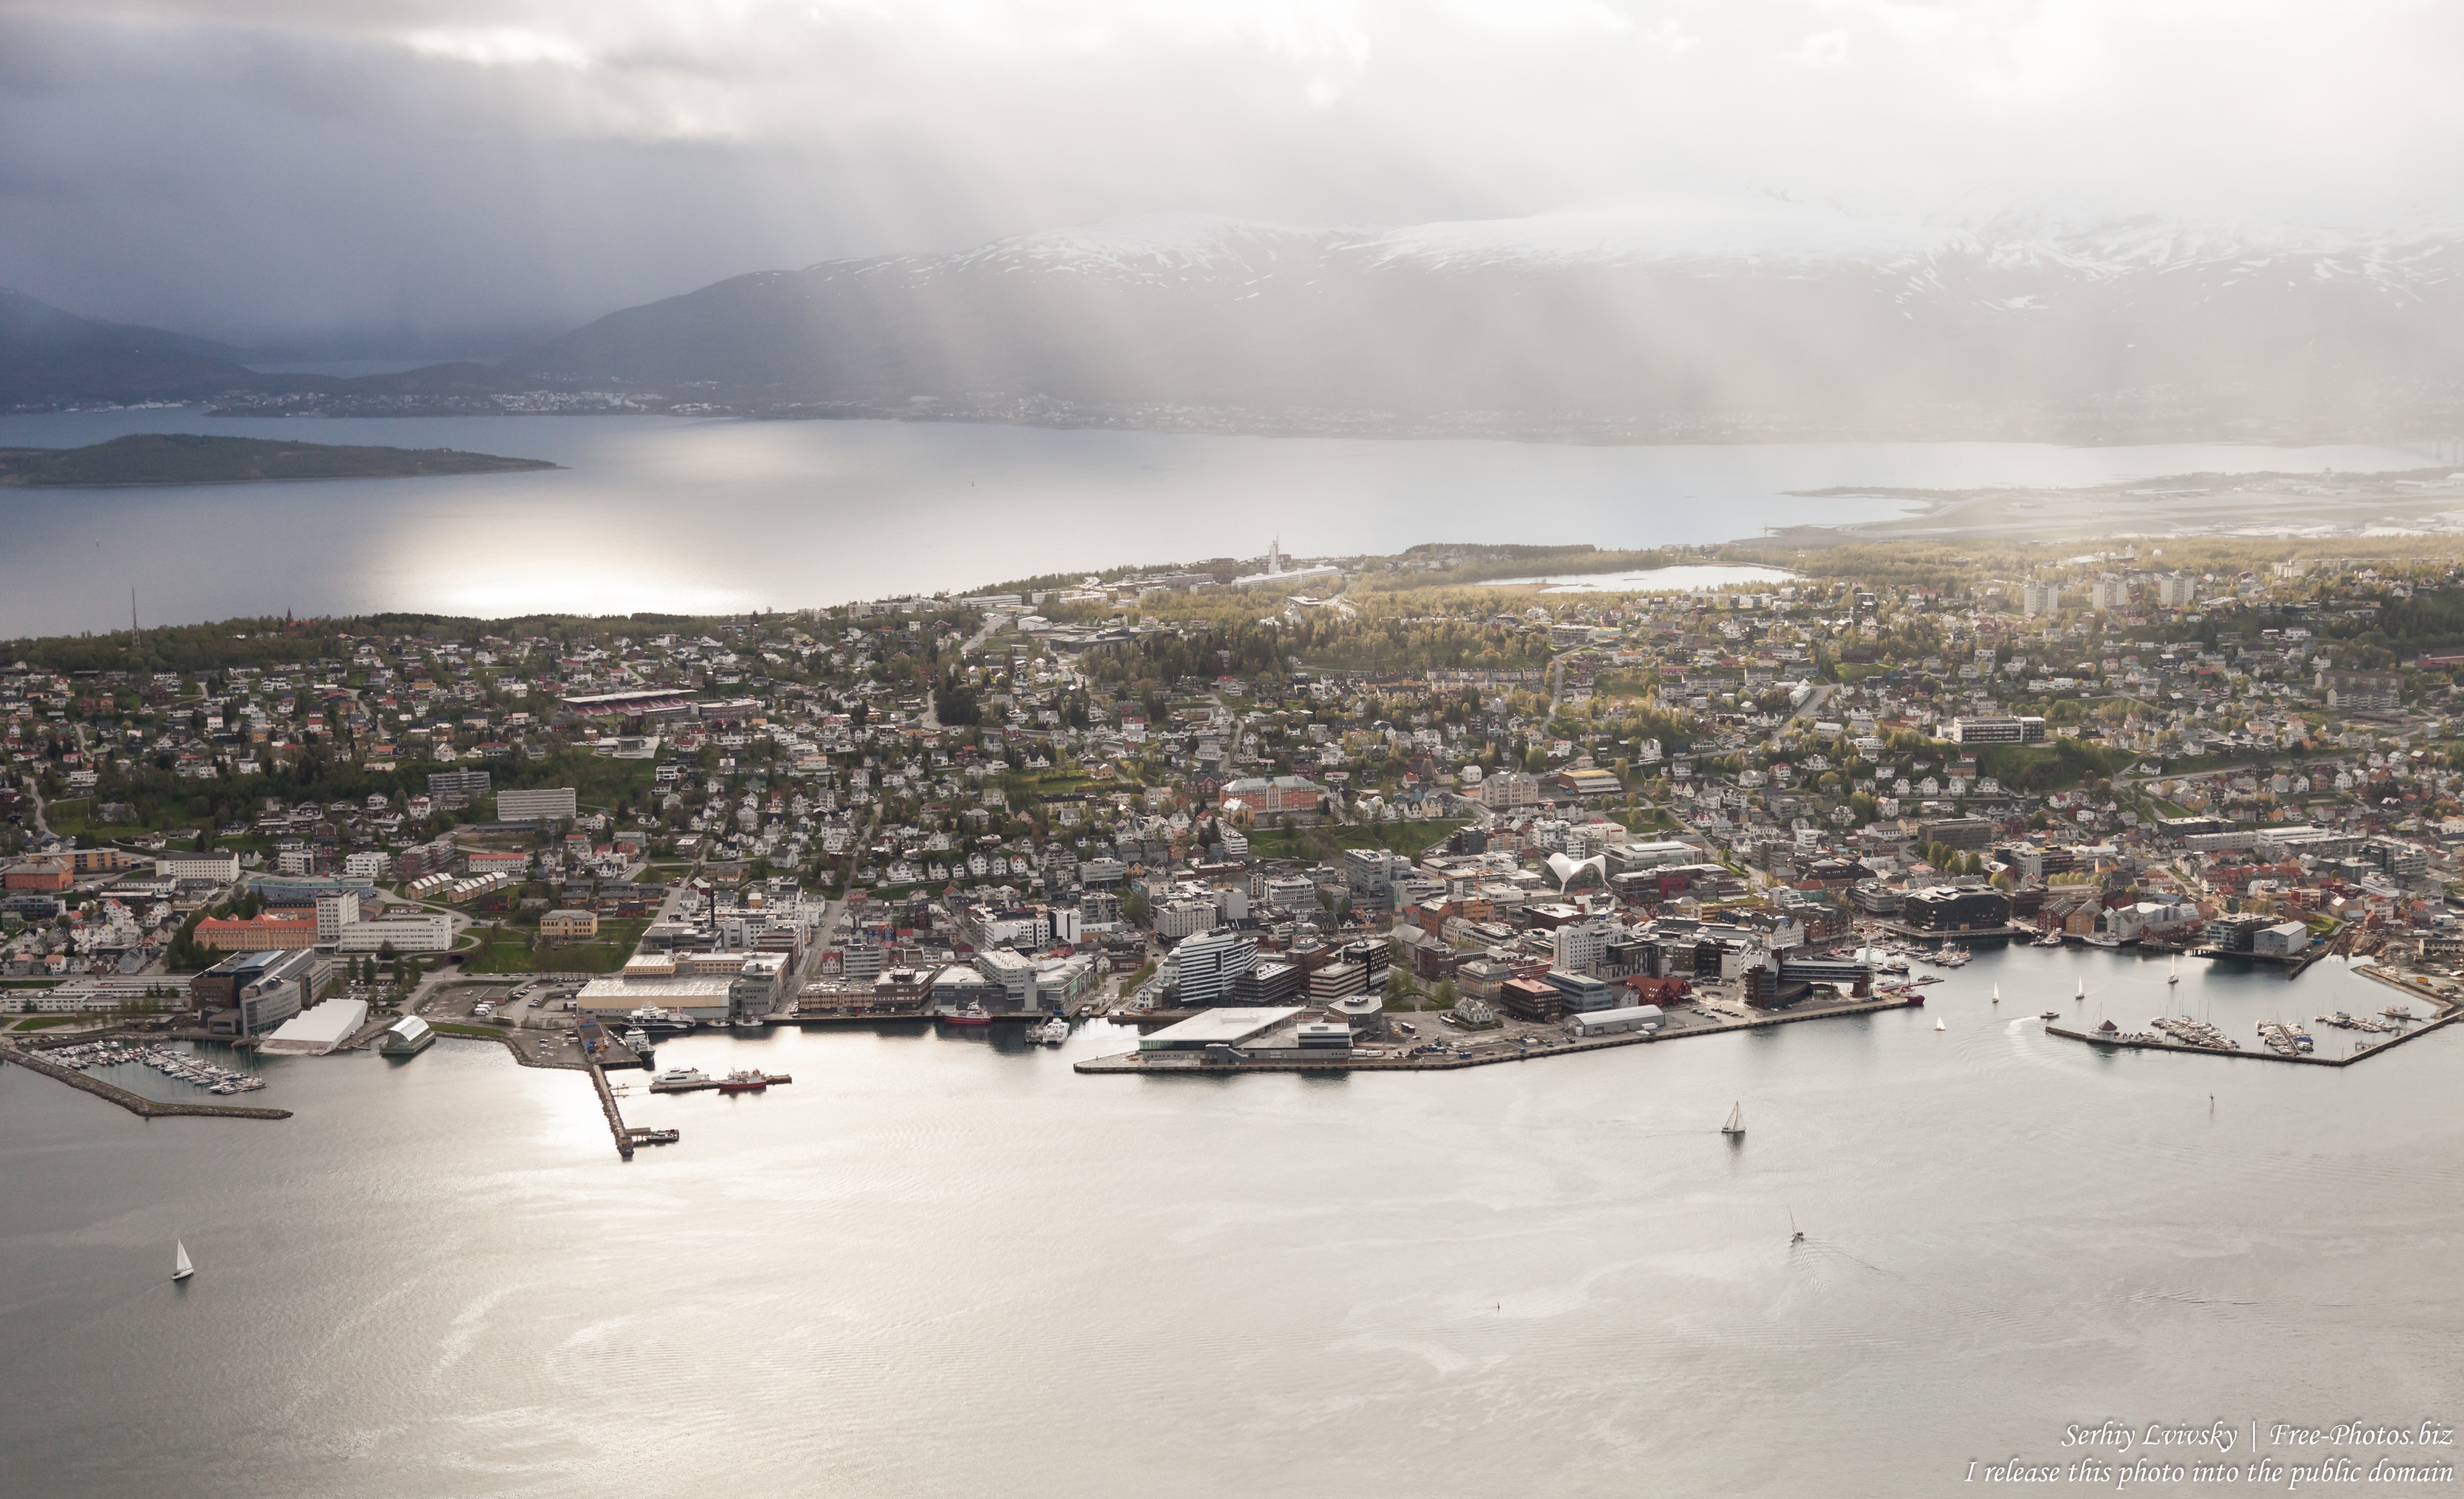 Tromso, Norway, photographed in June 2018 by Serhiy Lvivsky, picture 3